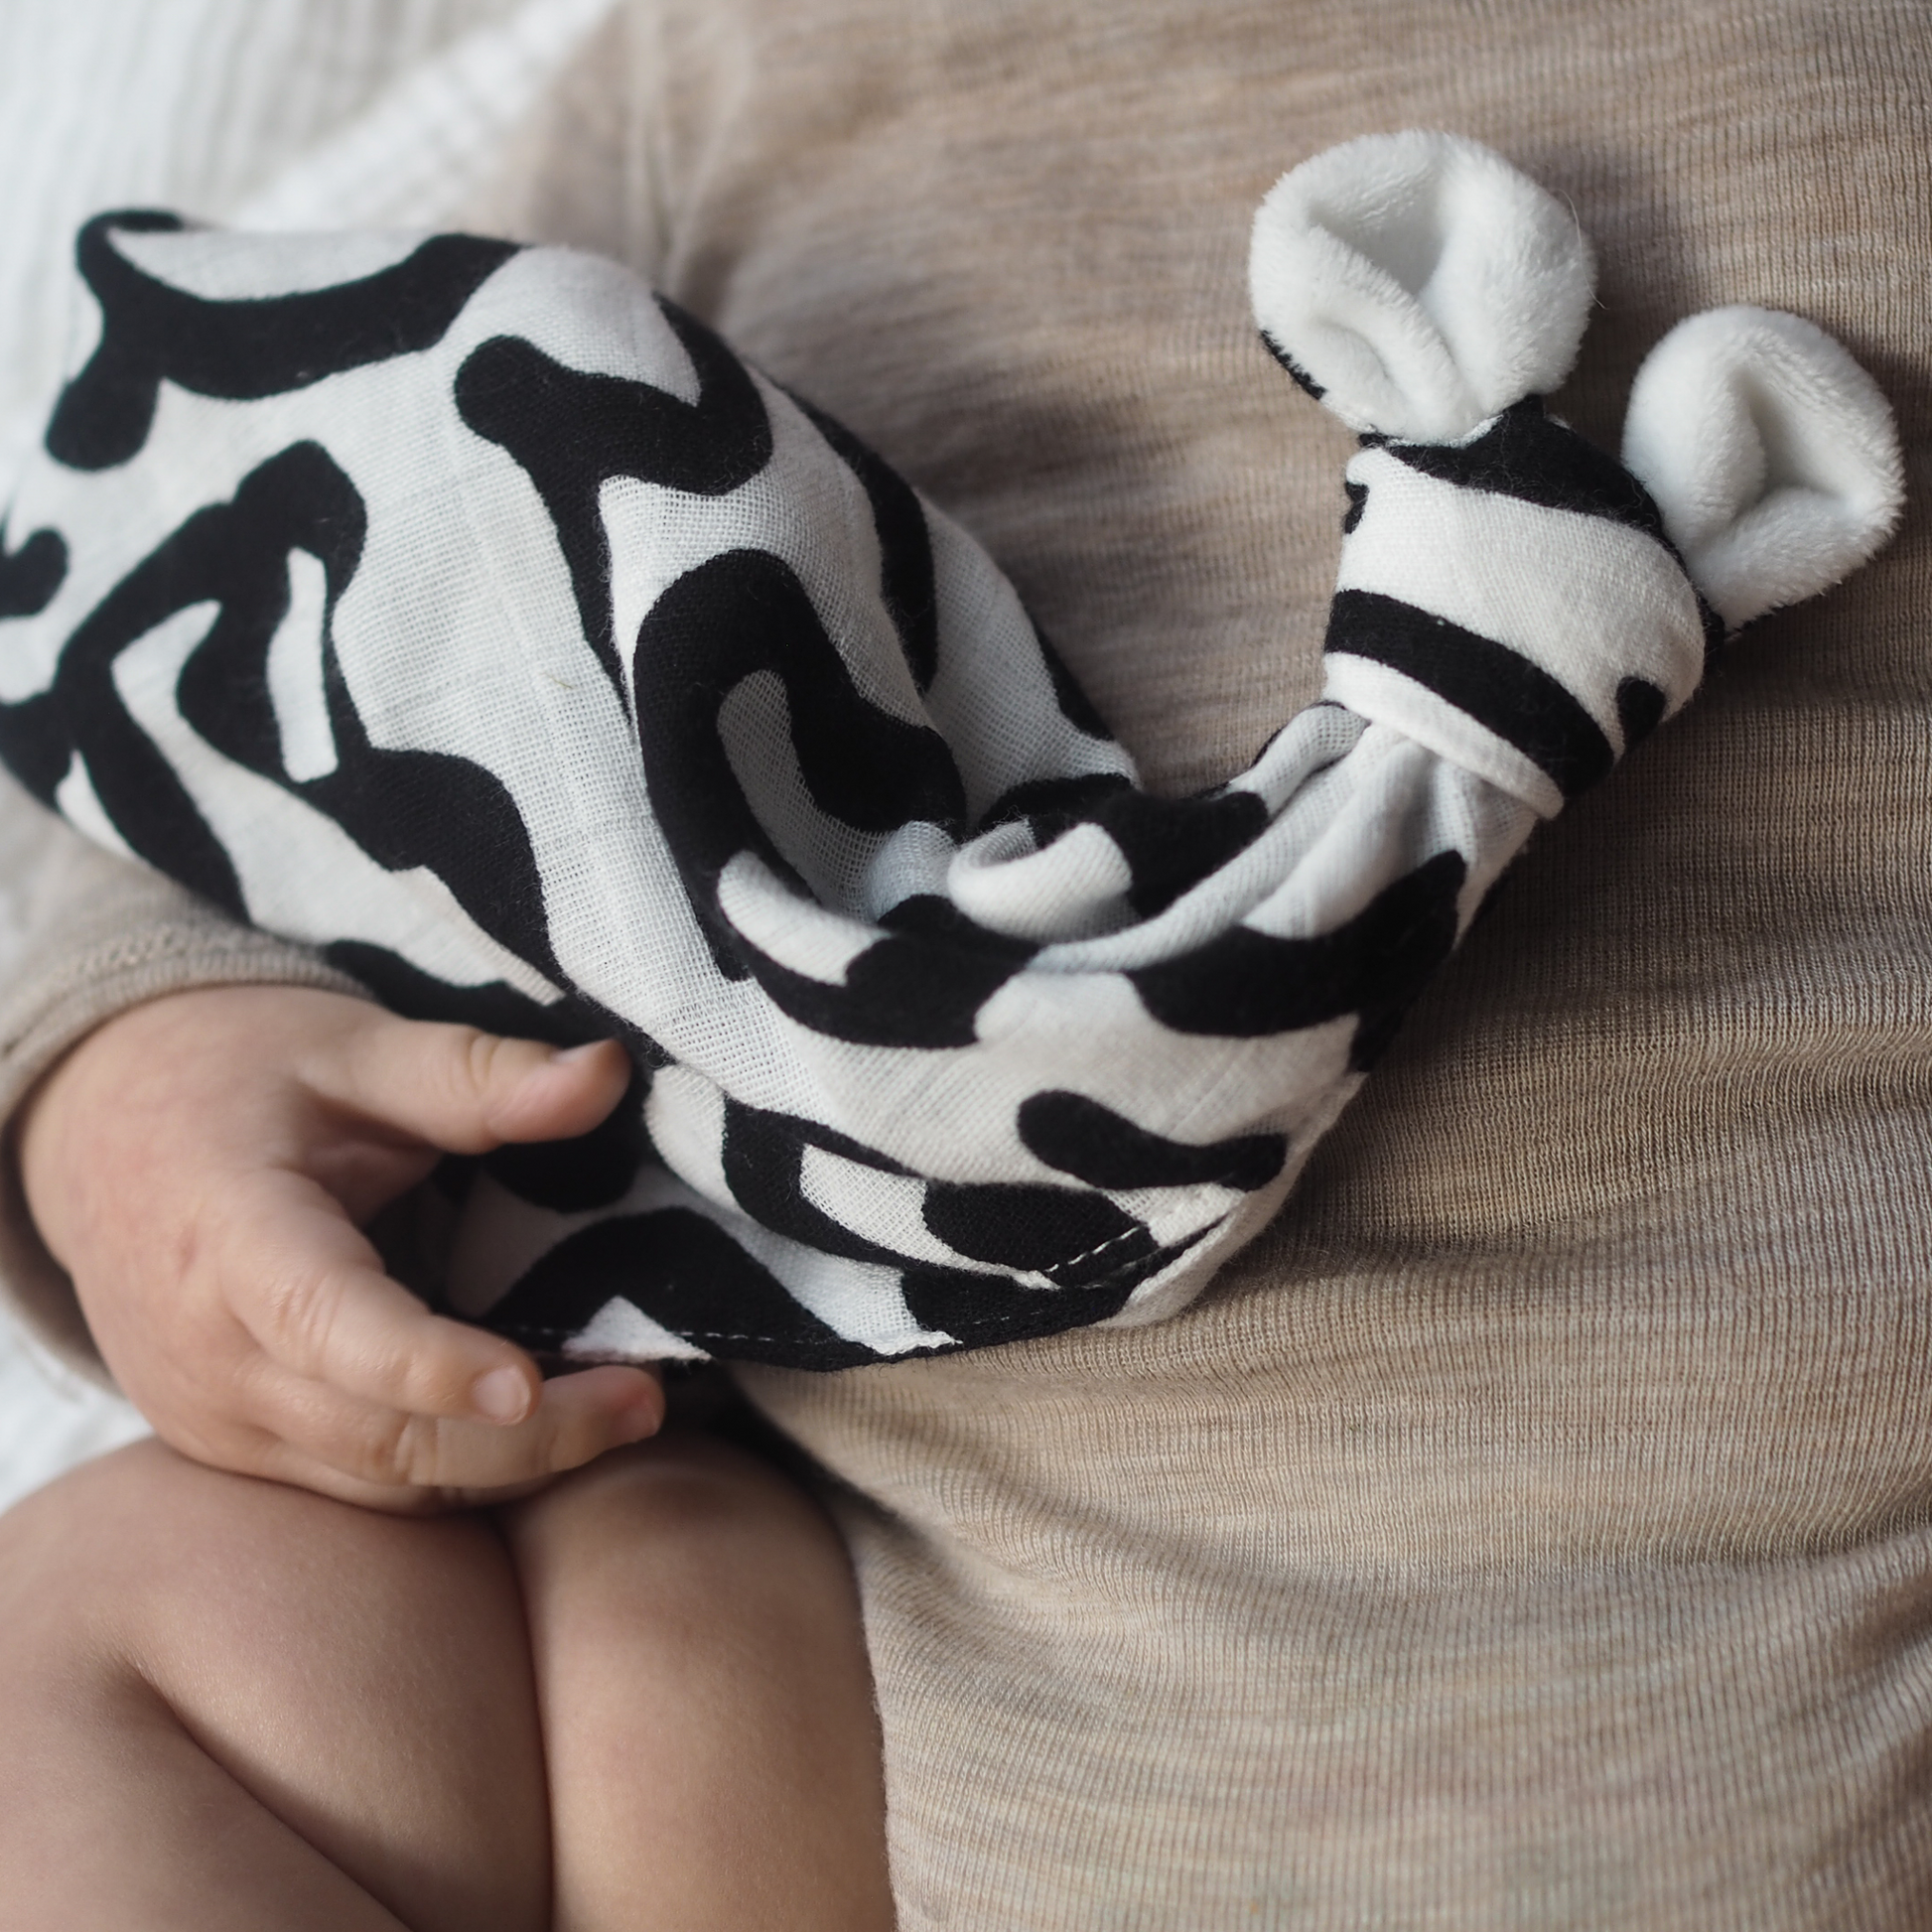 Keith Haring Print Baby Lovey lifestyle detail product shot in color black and white by Etta Loves for South Hous.